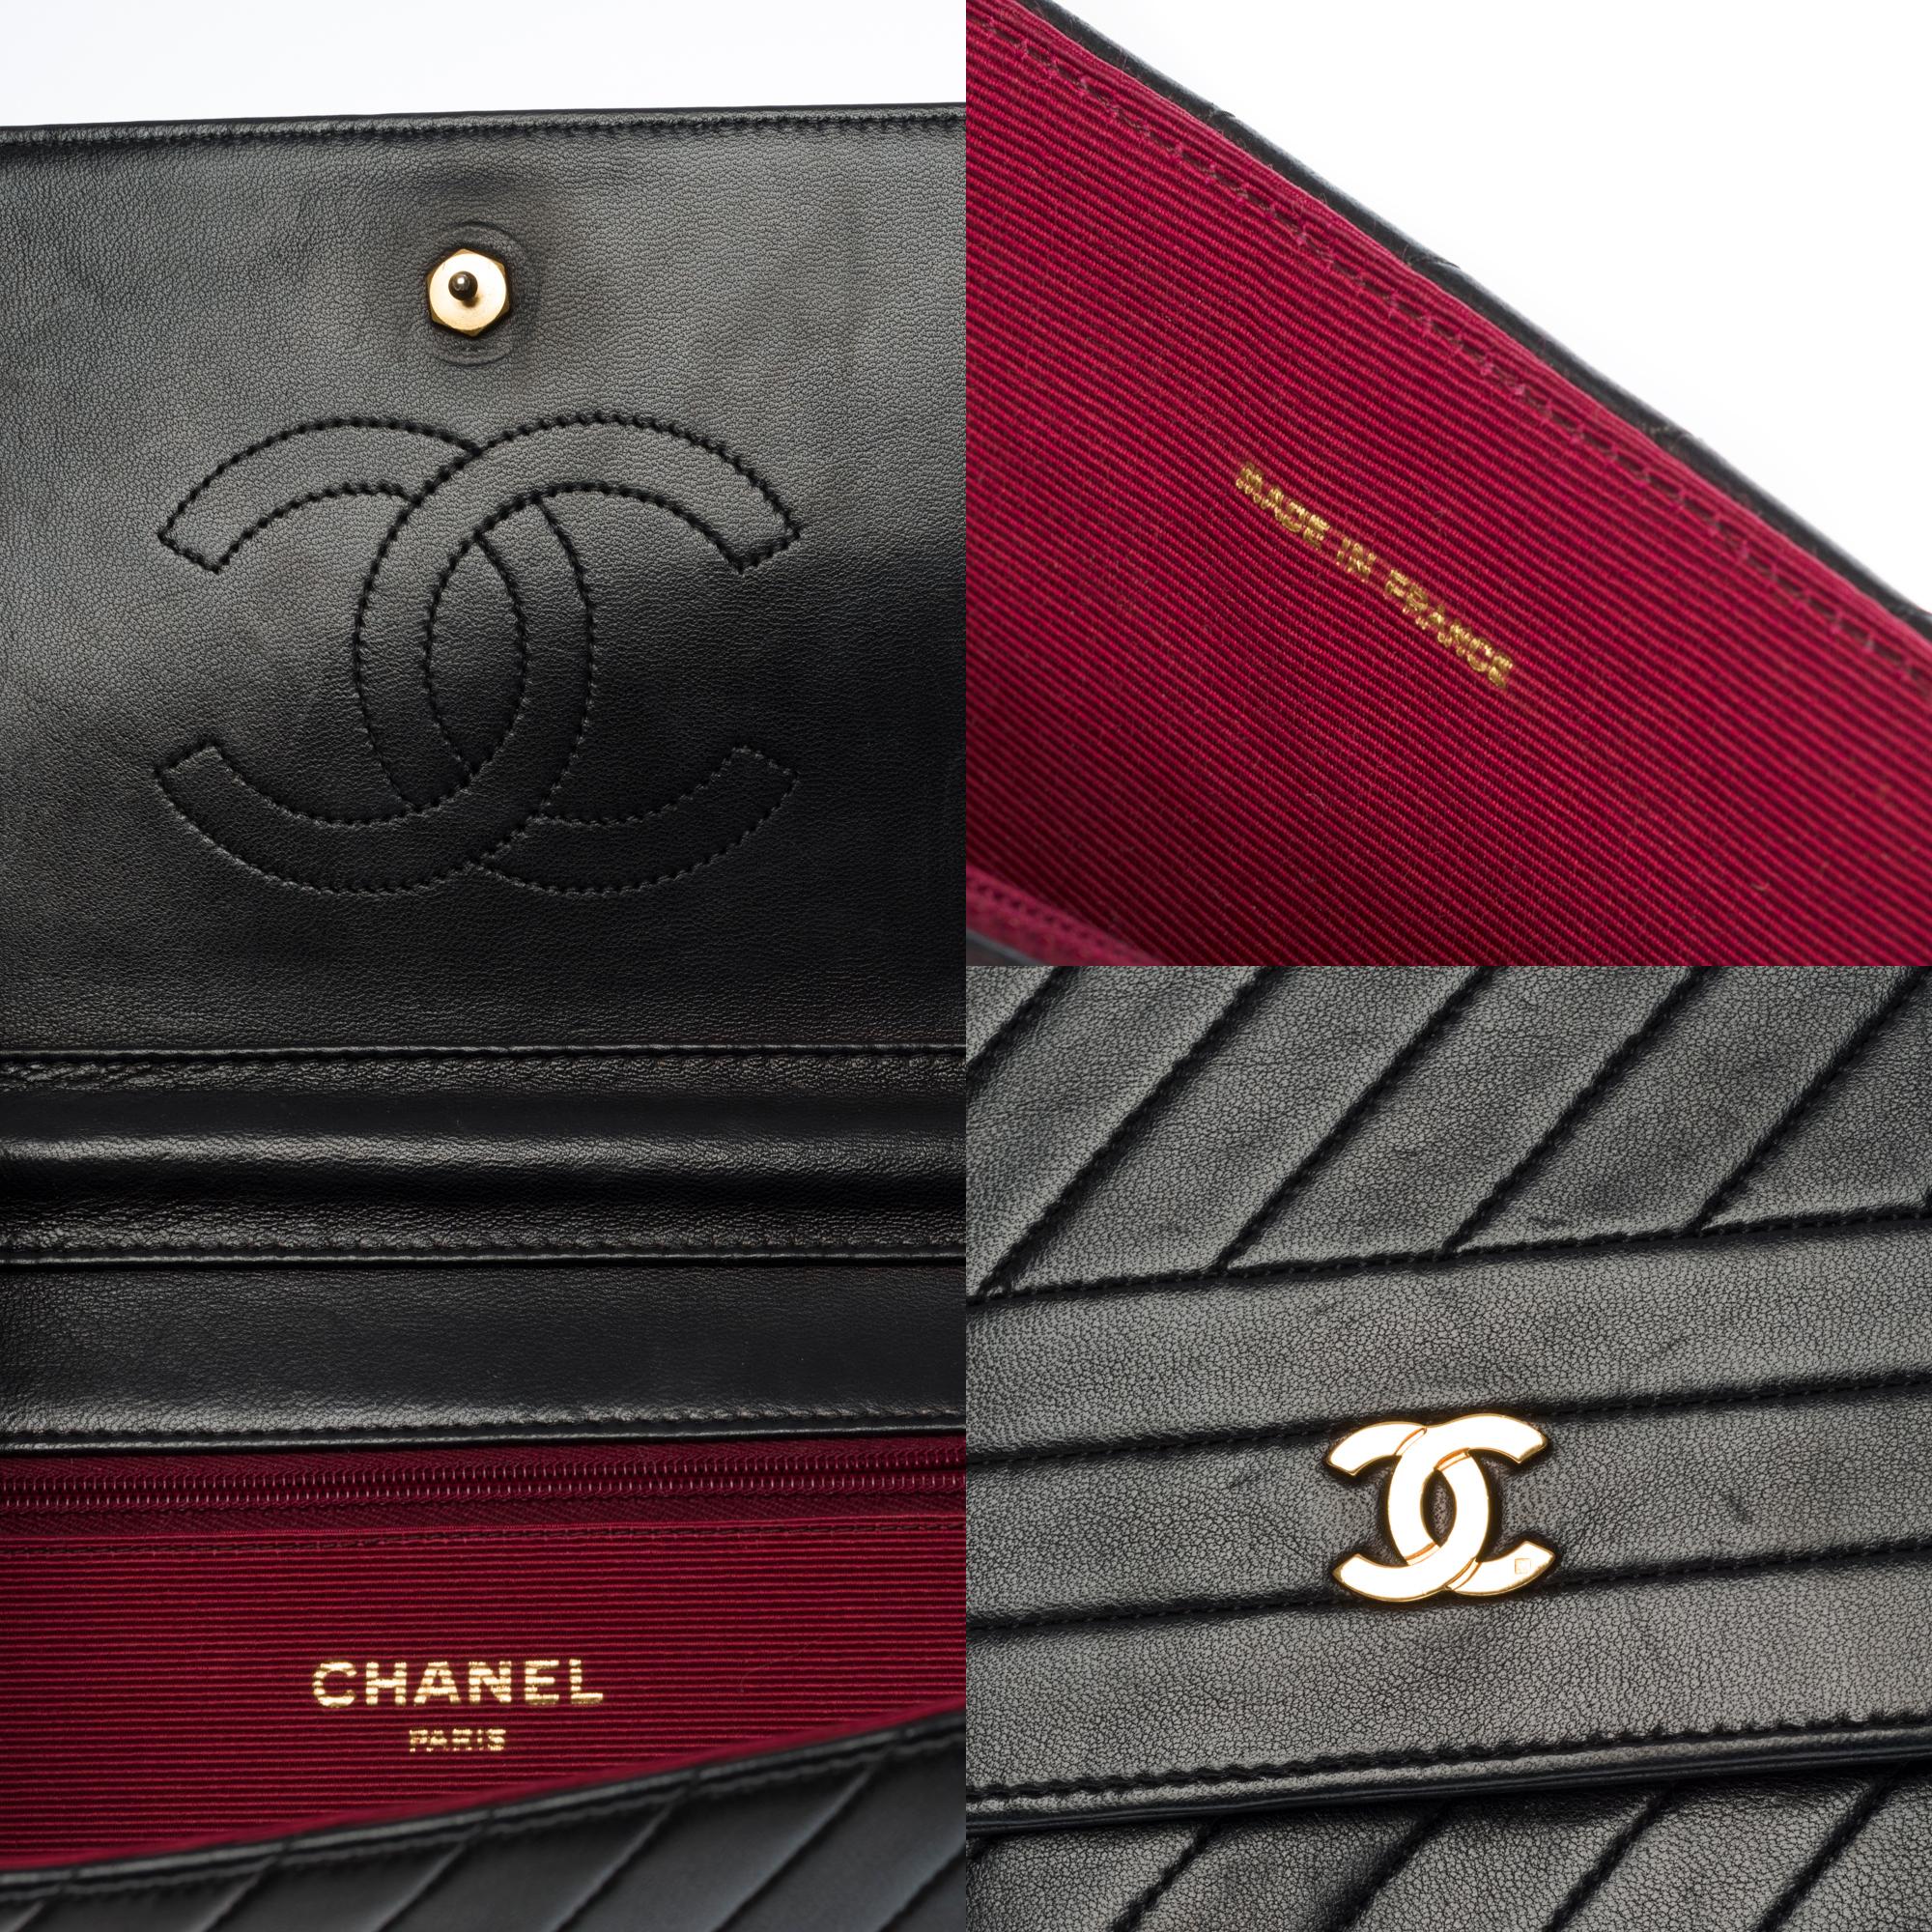 Women's Chanel Classic shoulder bag in black quilted leather with herringbone , GHW